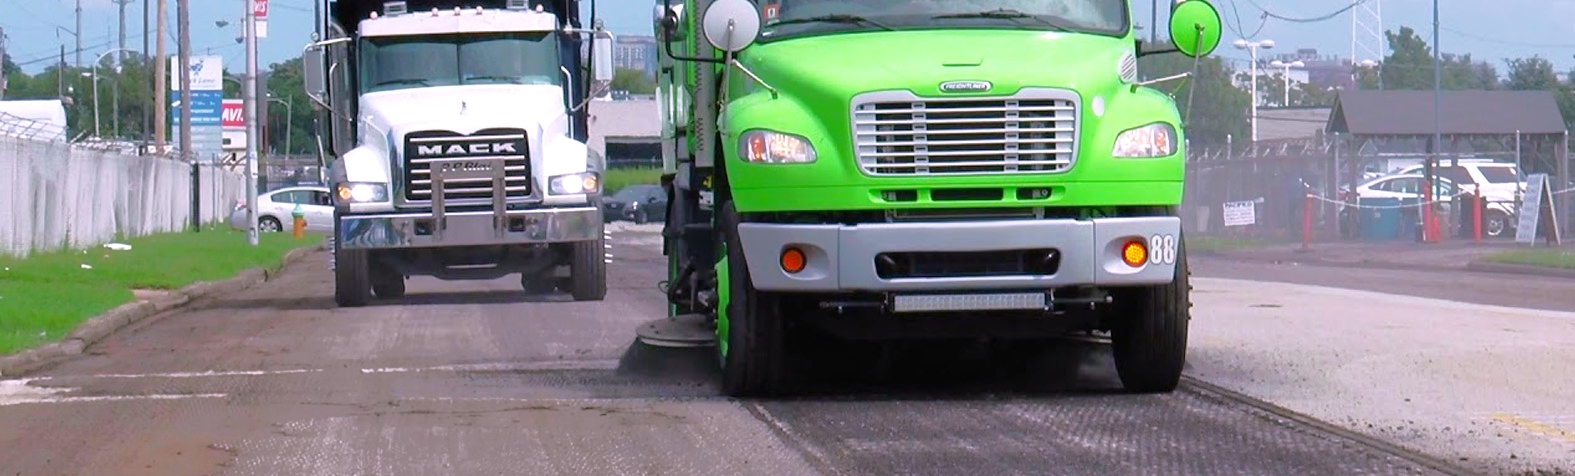 Street Sweeping Public Works- Government Applications- Carolina Industrial Equipment